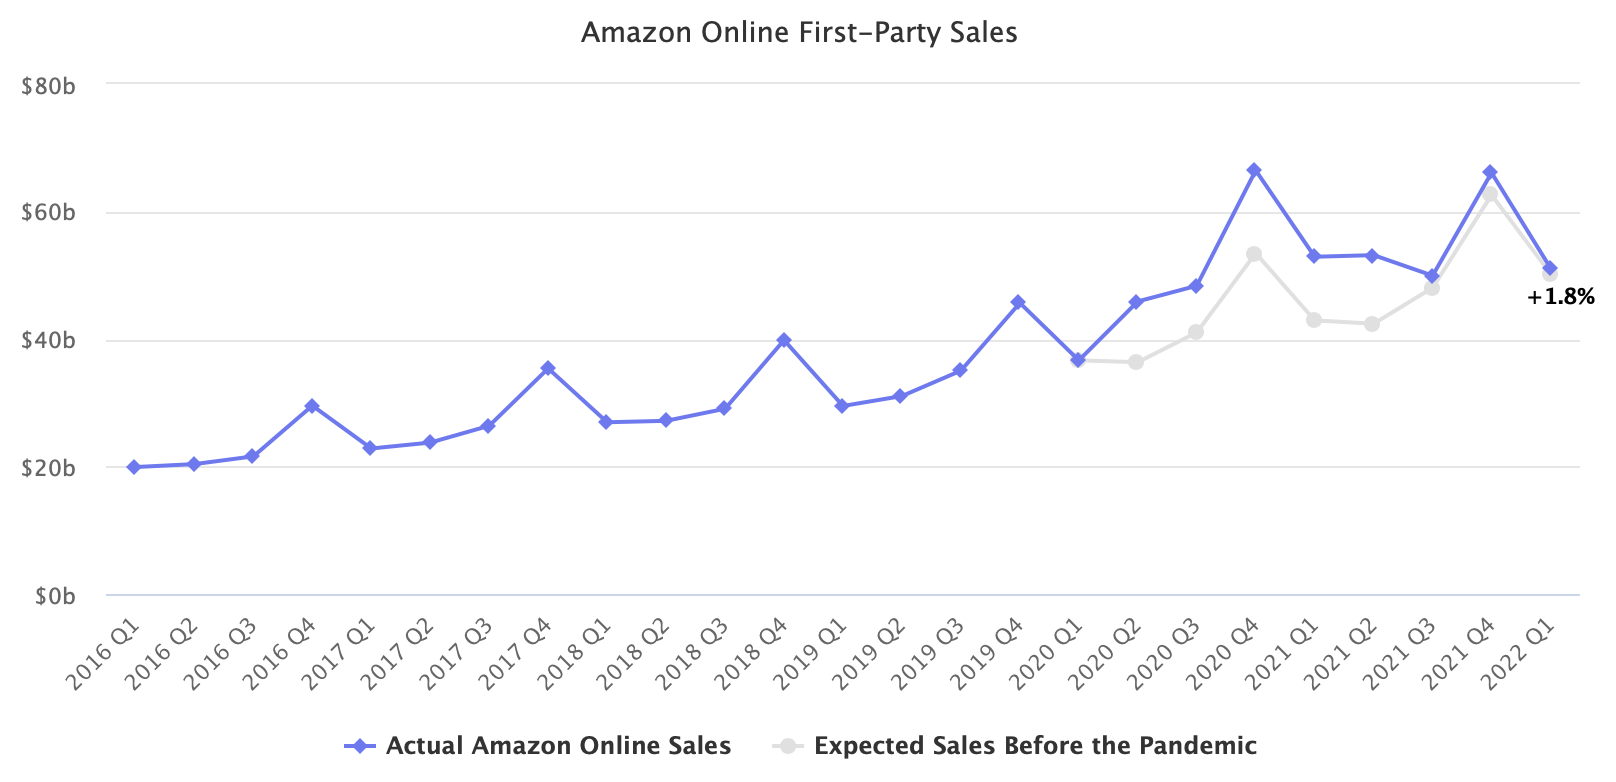 Amazon Online First-Party Sales